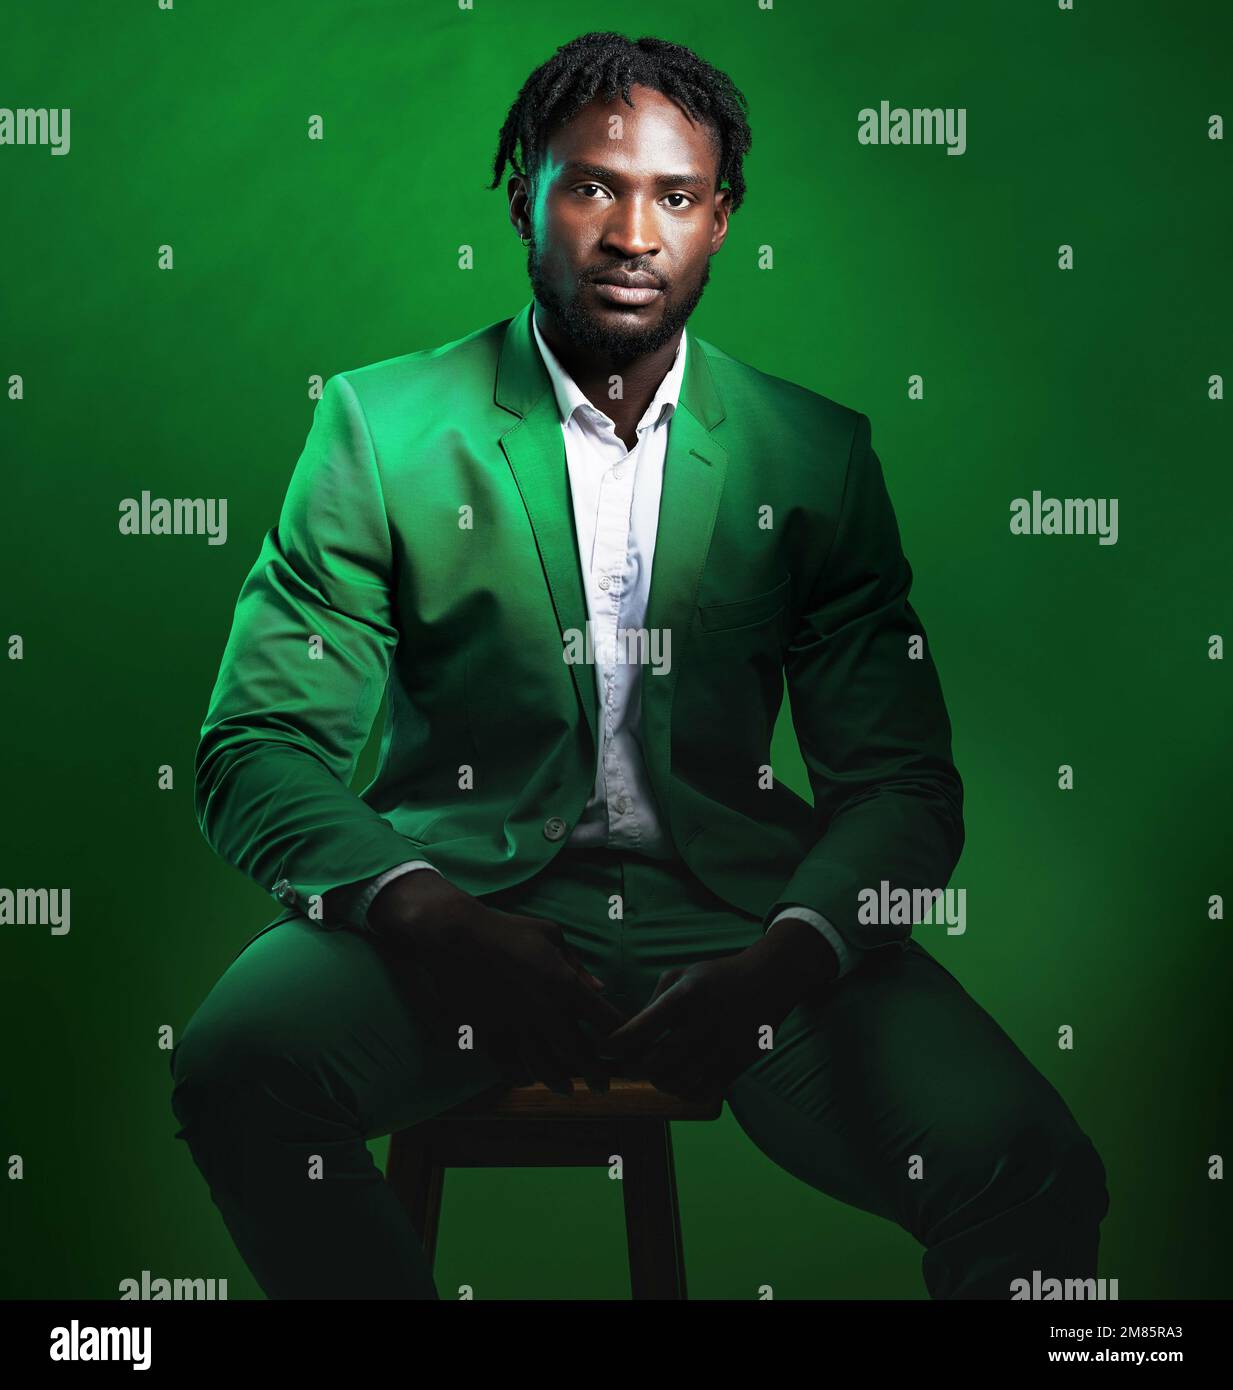 Fashion, formal and portrait of a black man in a suit sitting on a chair in studio with a luxury outfit. Elegant, stylish and African male model with Stock Photo